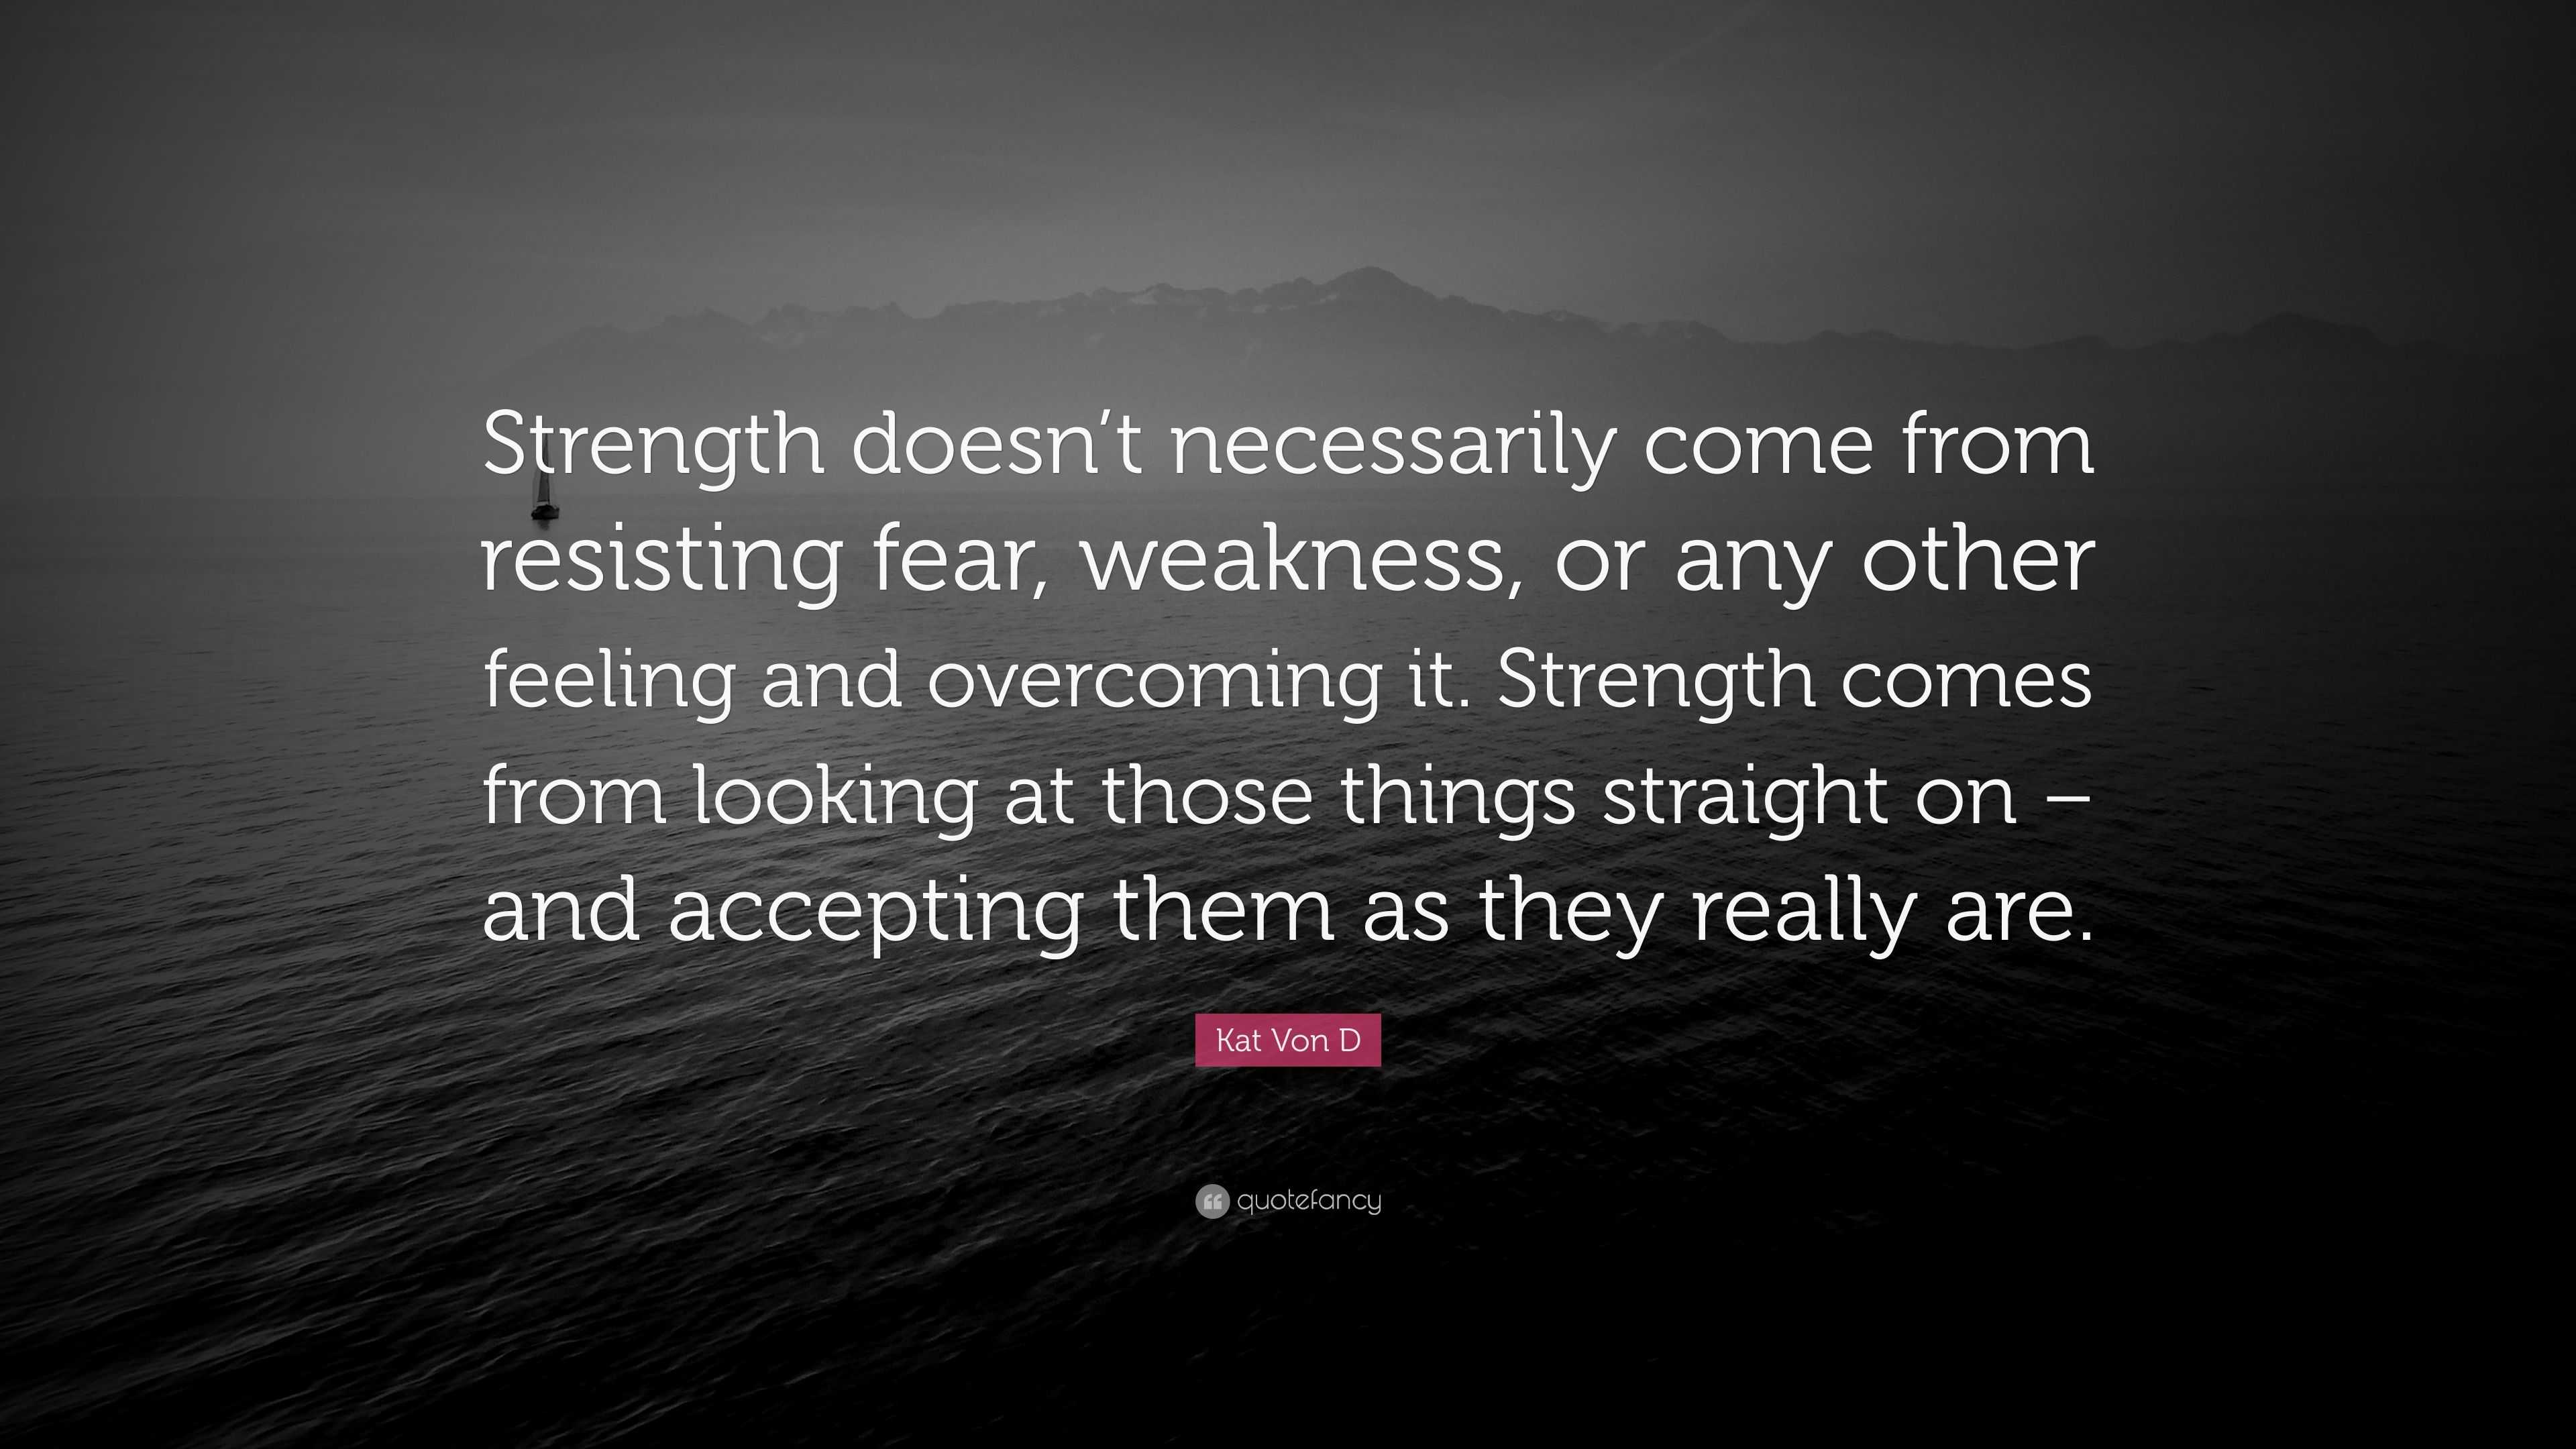 Kat Von D Quote: “Strength doesn’t necessarily come from resisting fear ...